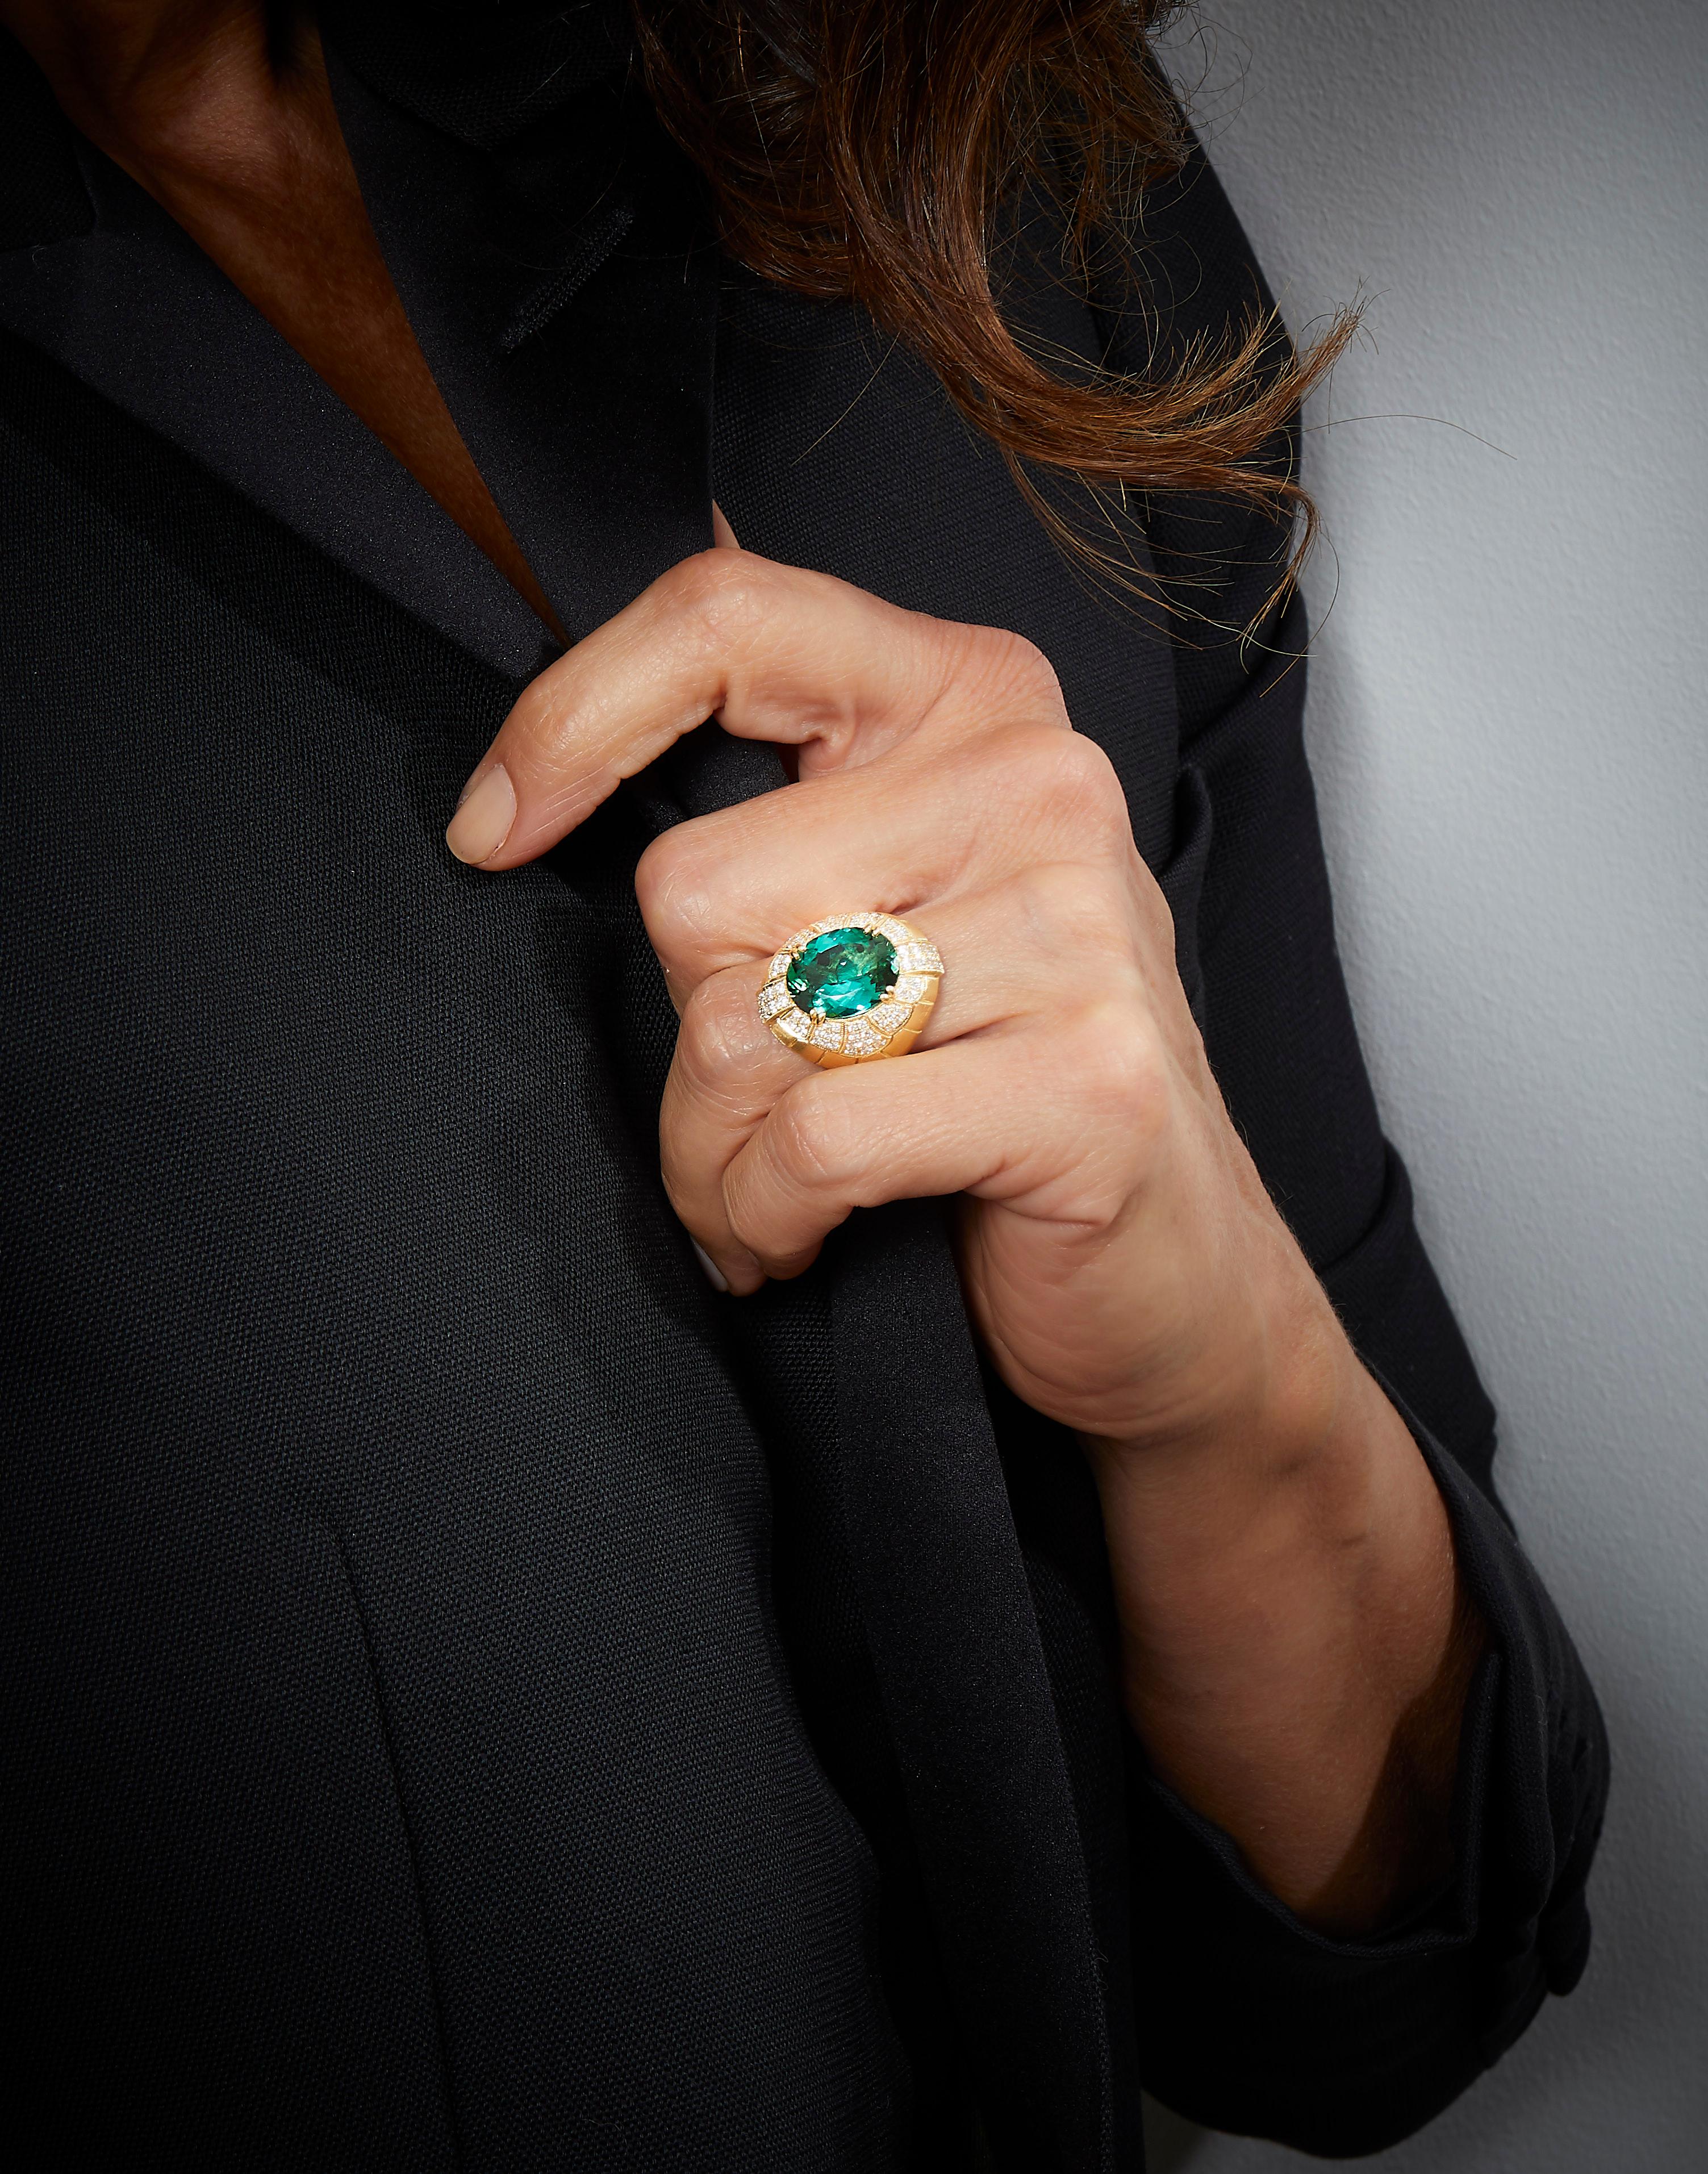 Designed by Eva Soussana, artist and founder of Hera-Jewellery, this gorgeous cocktail ring from the 